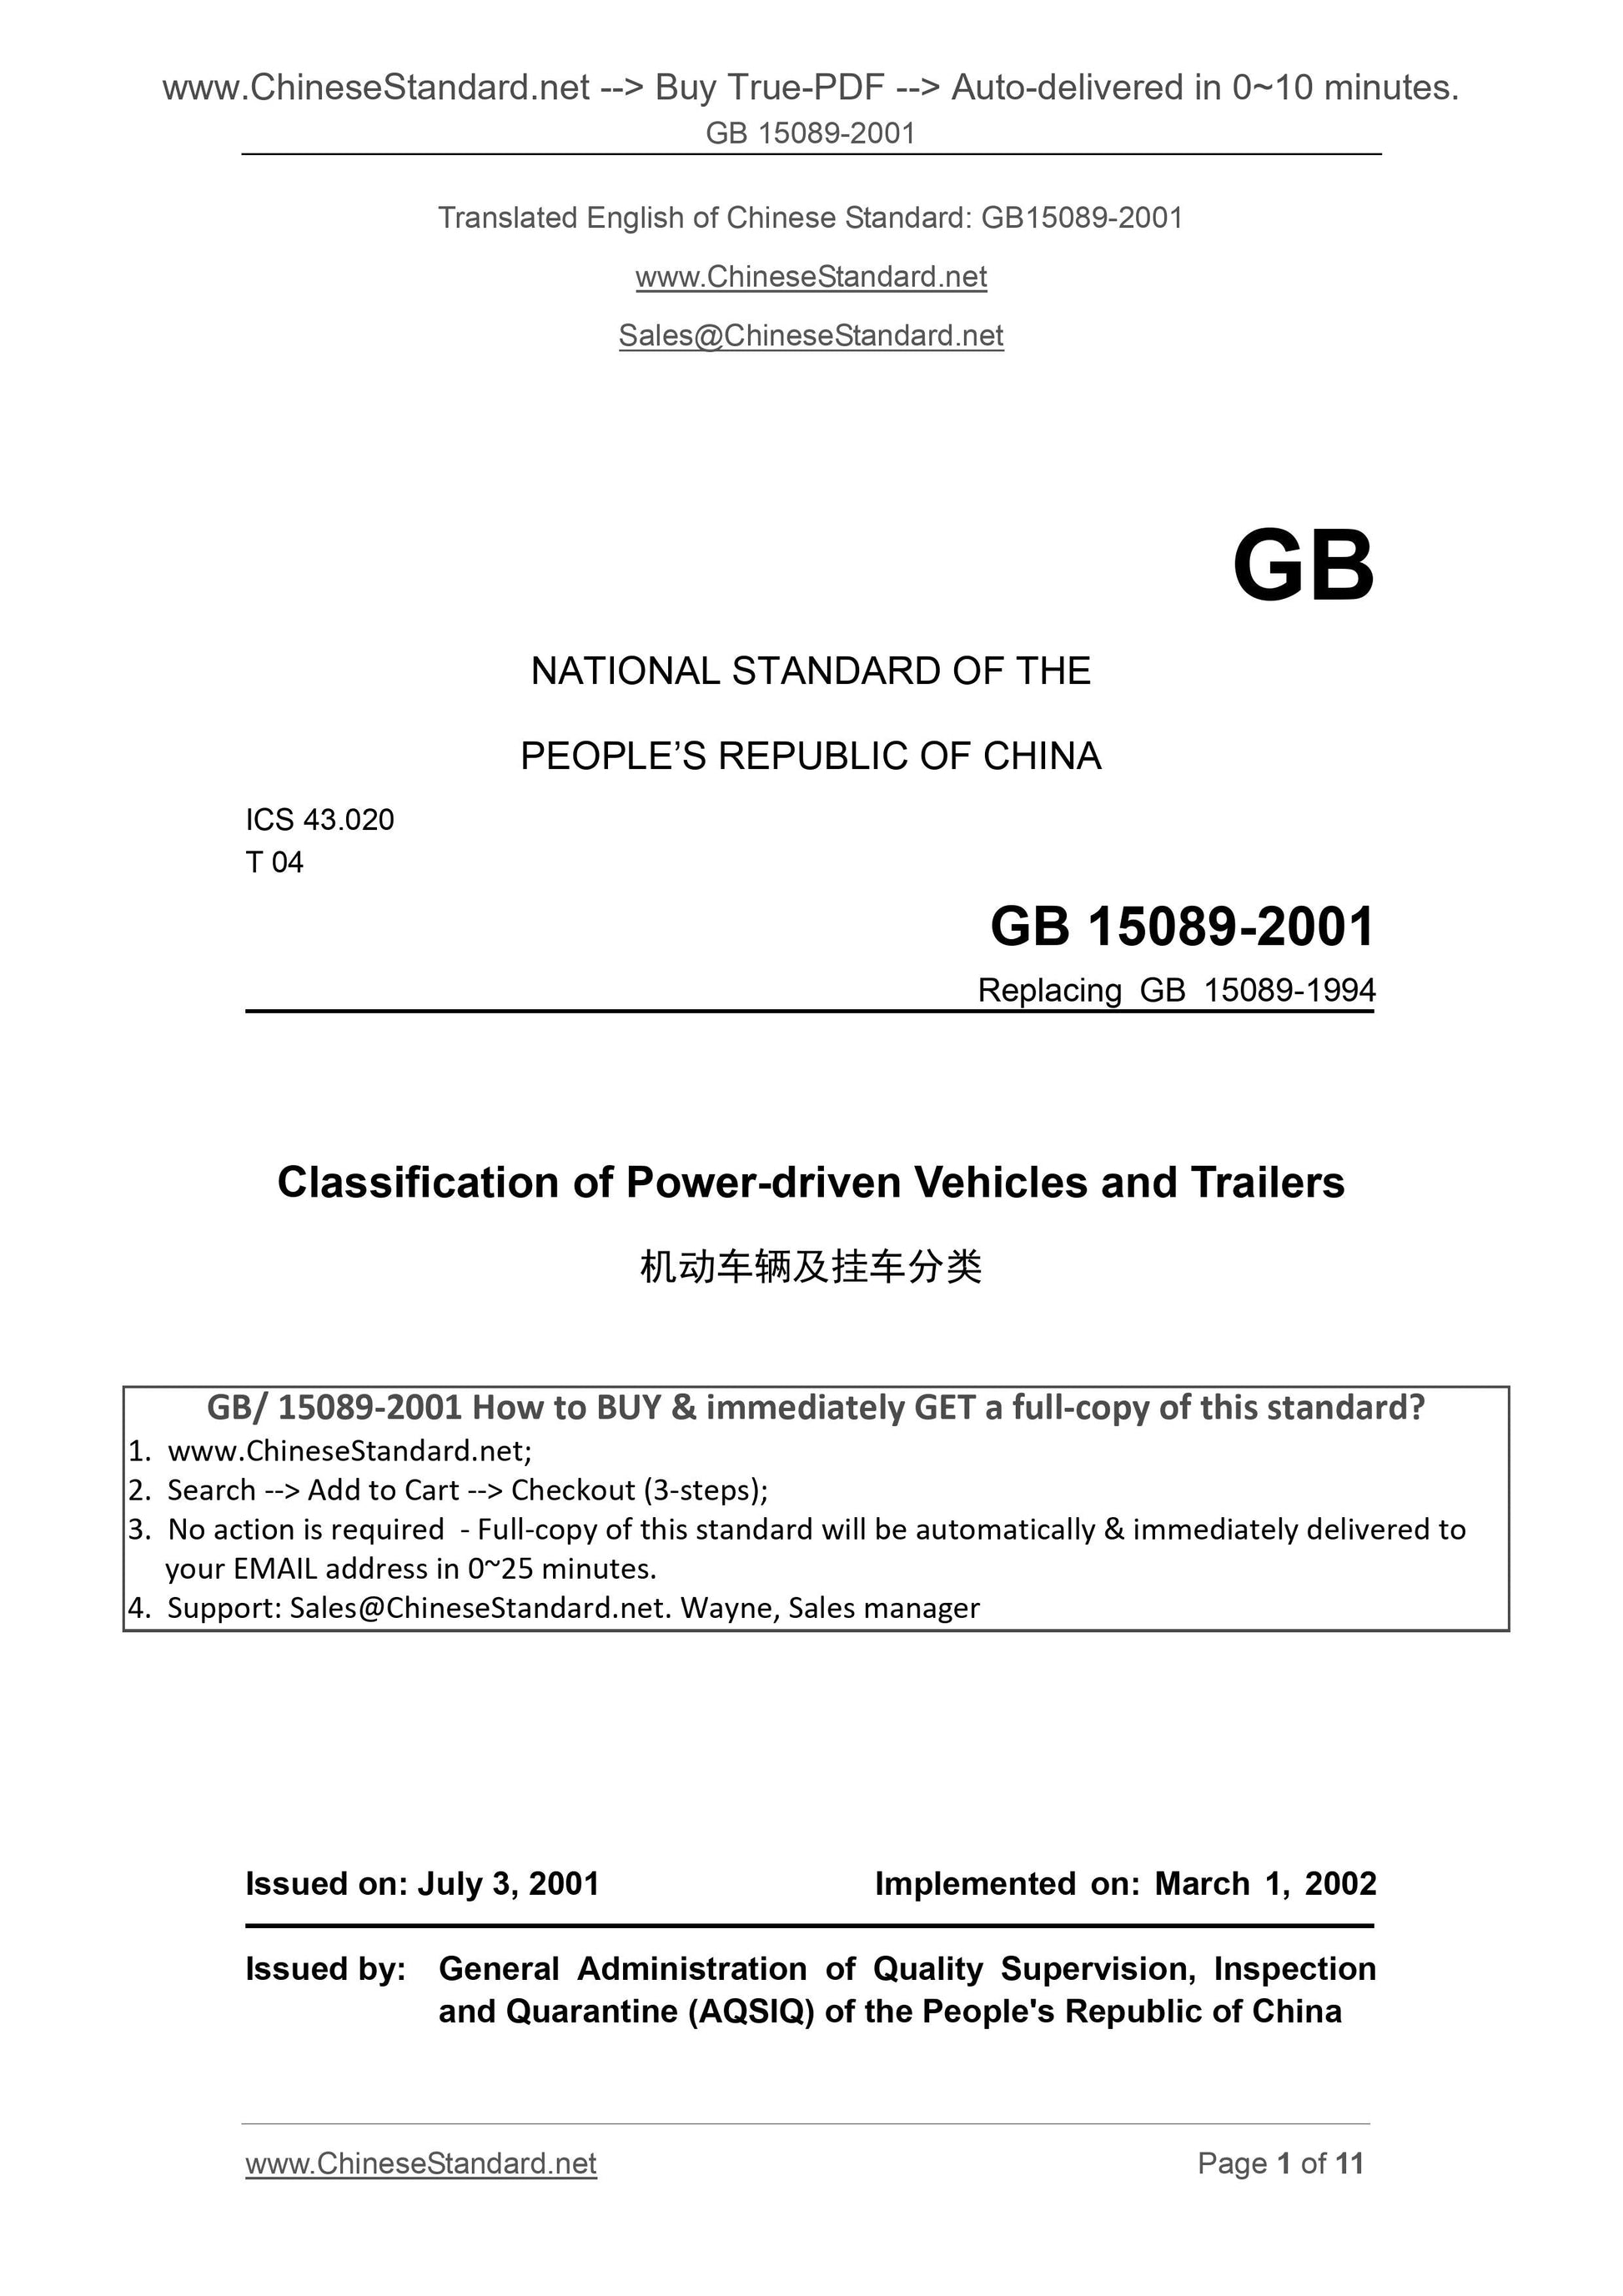 GB/T 15089-2001 Page 1